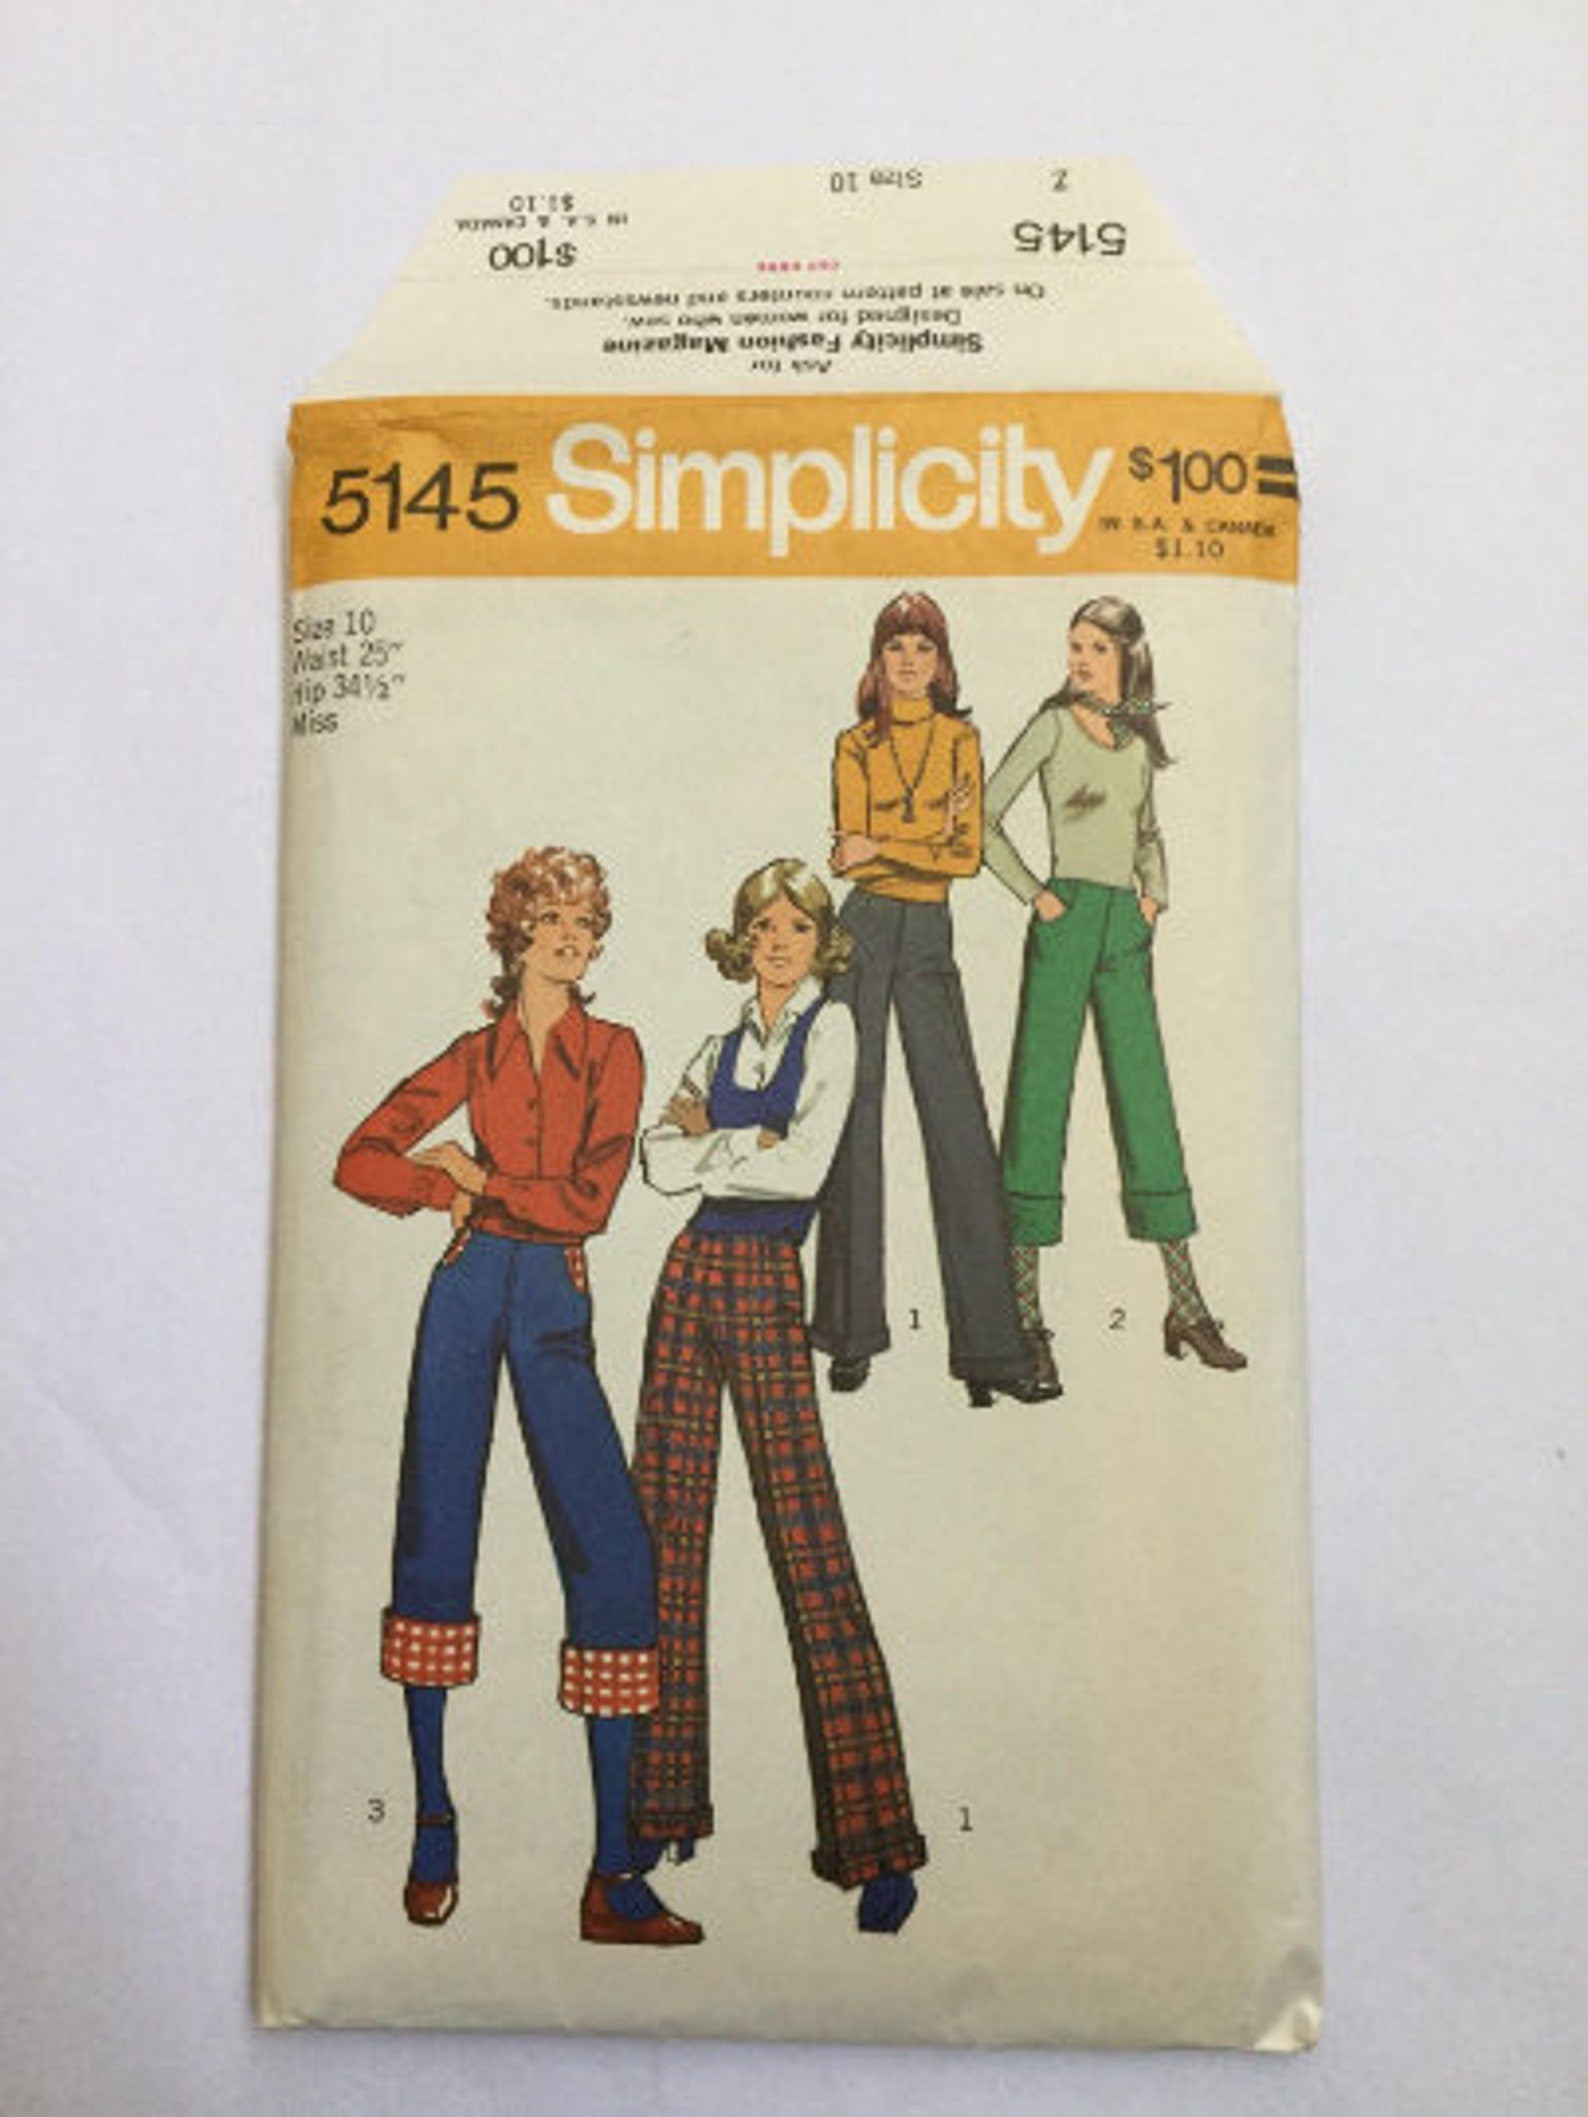 Vintage 1970s Sewing Pattern,Women's Bell Bottoms, Simplicity 5145